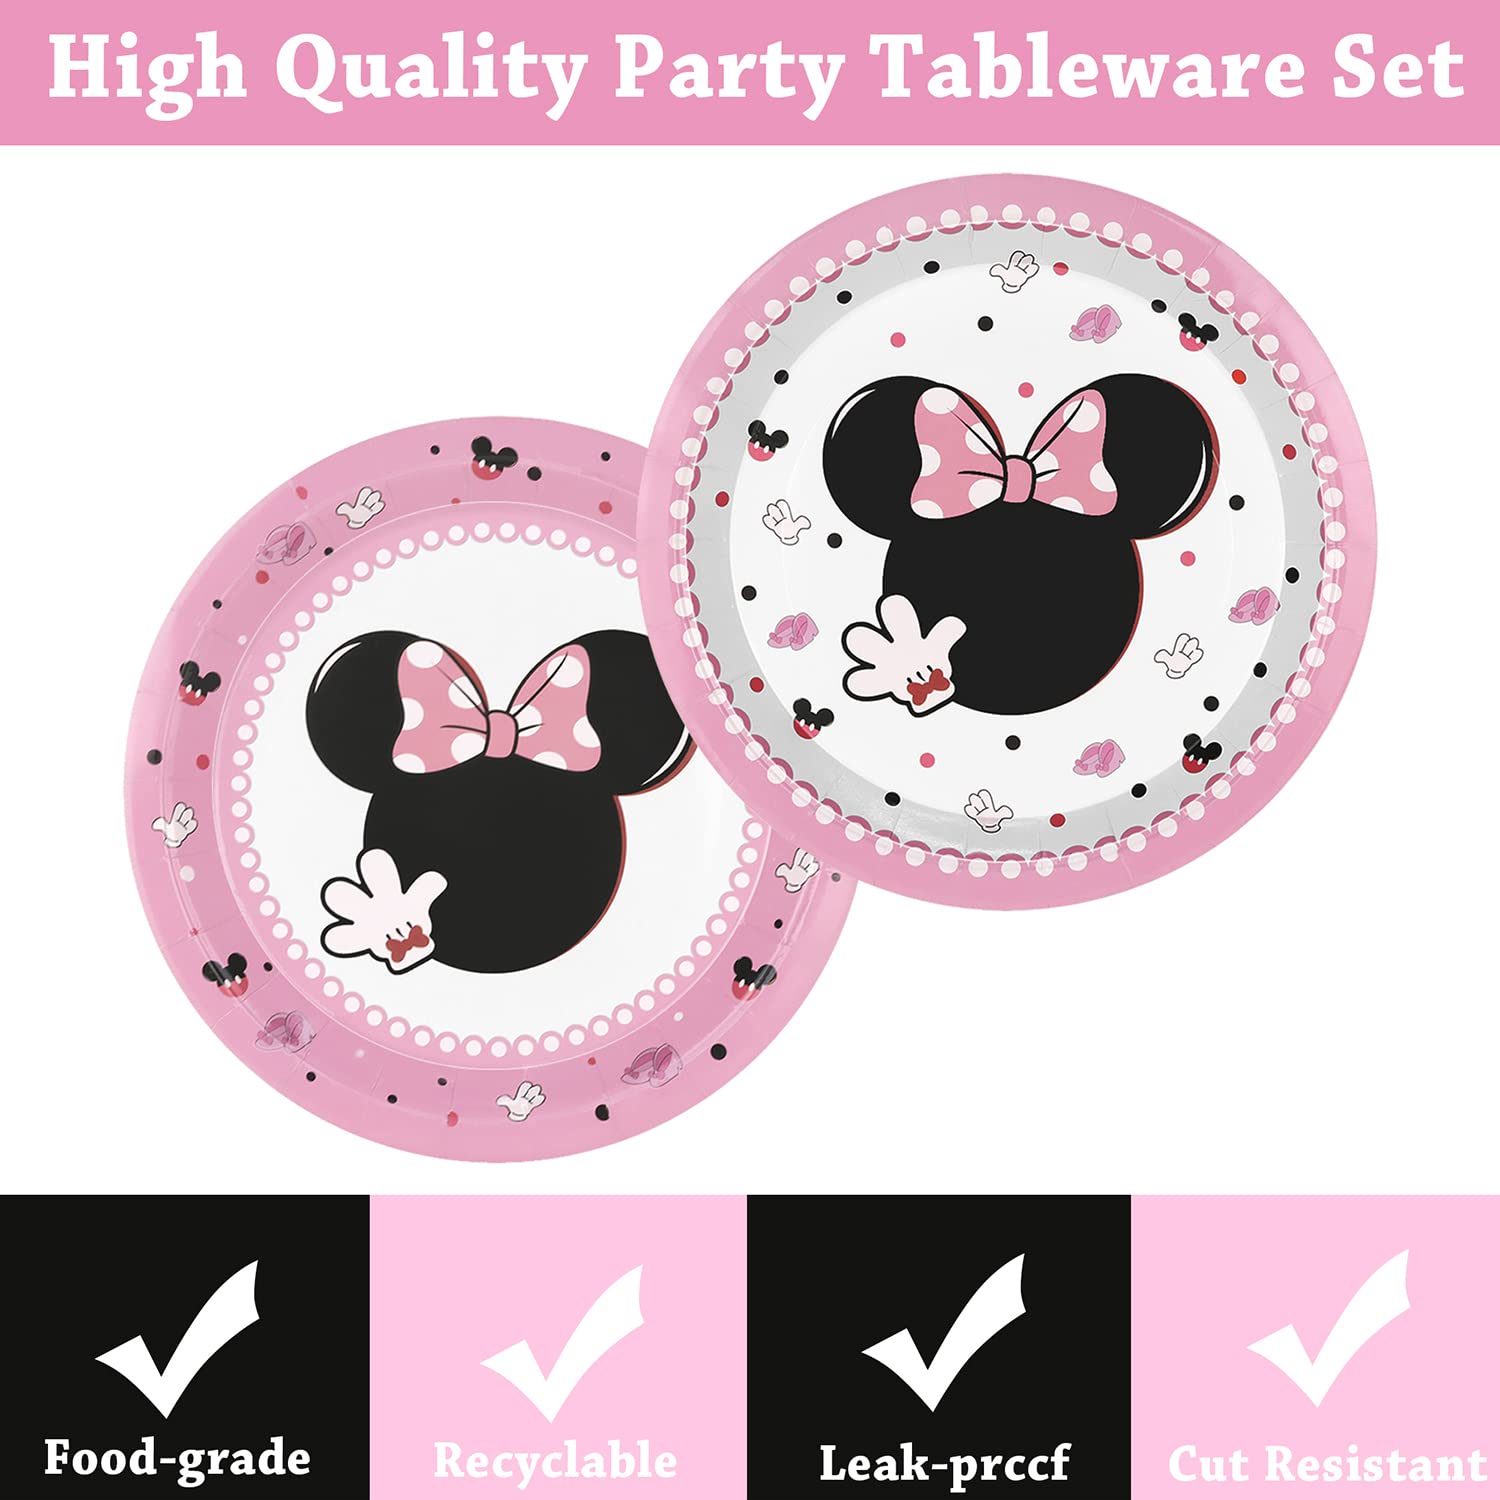 Mouse Birthday Party Supplies,50 Pack Mouse Party Favors,Pink Tableware Paper Plates for Minnie Mouse Themed Baby Shower Birthday Party Decorations